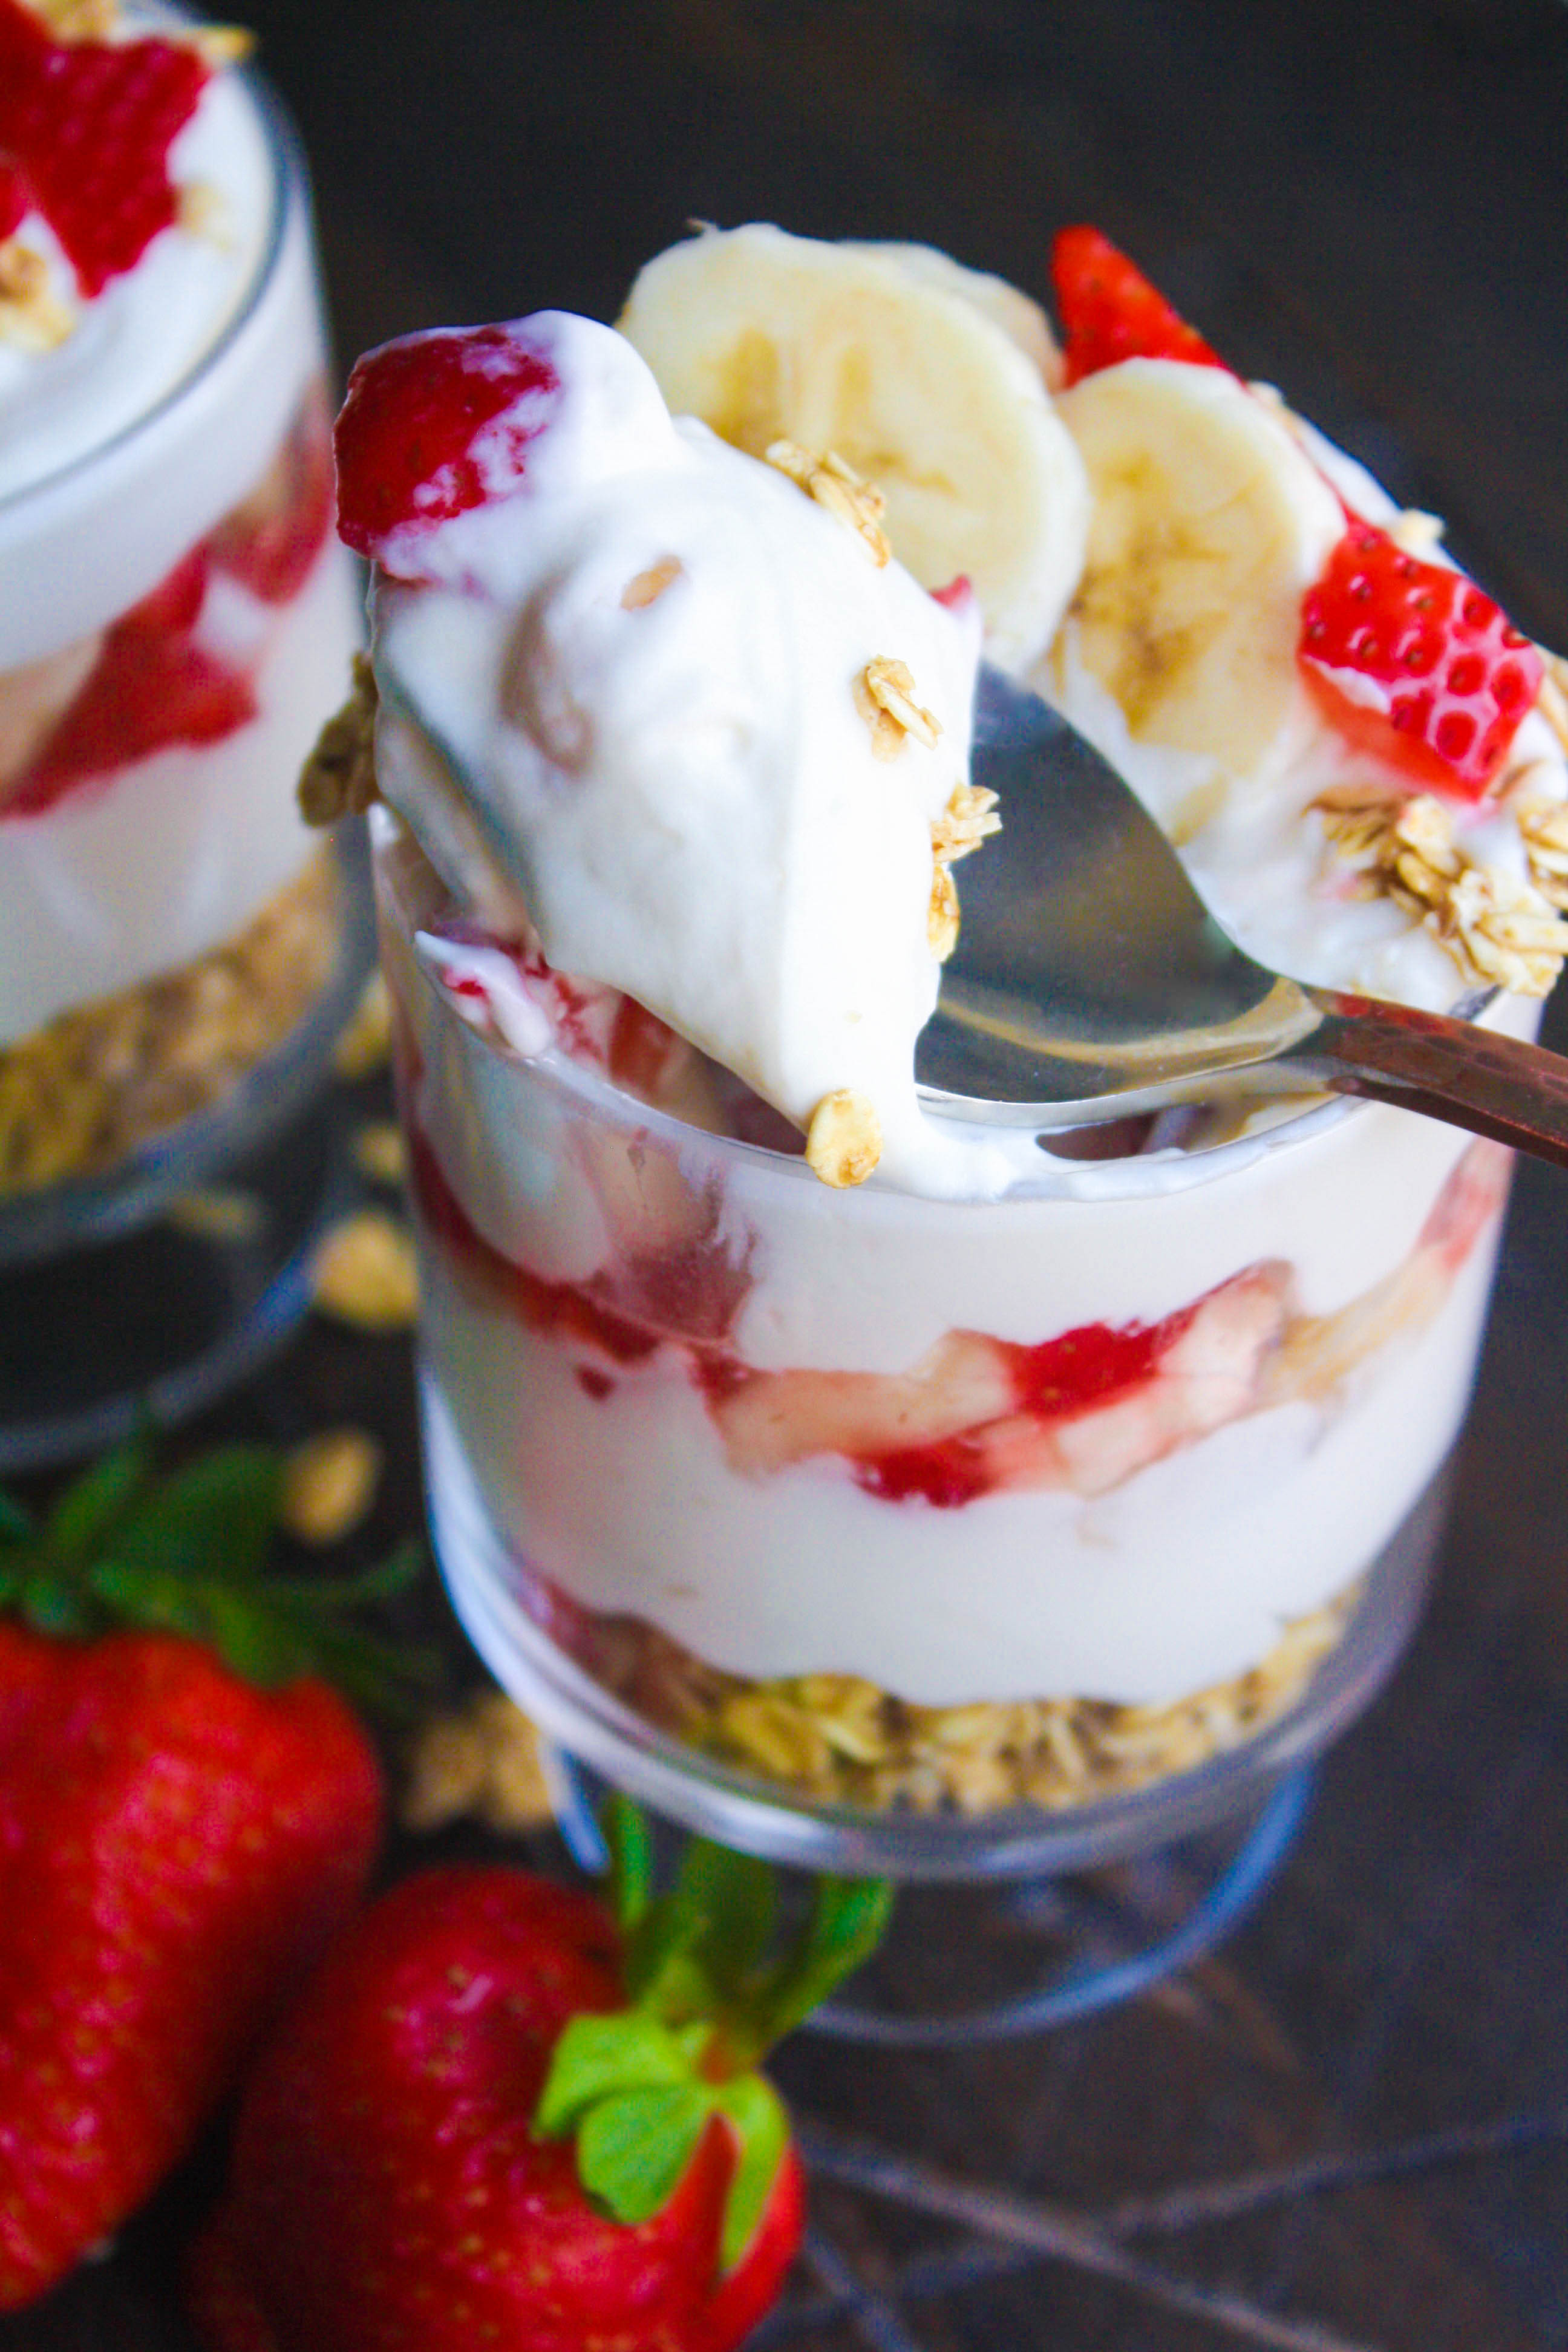 No Bake Strawberry-Banana Cheesecake Parfaits are so easy to make! You'll love the layers in these No Bake Strawberry-Banana Cheesecake Parfaits!